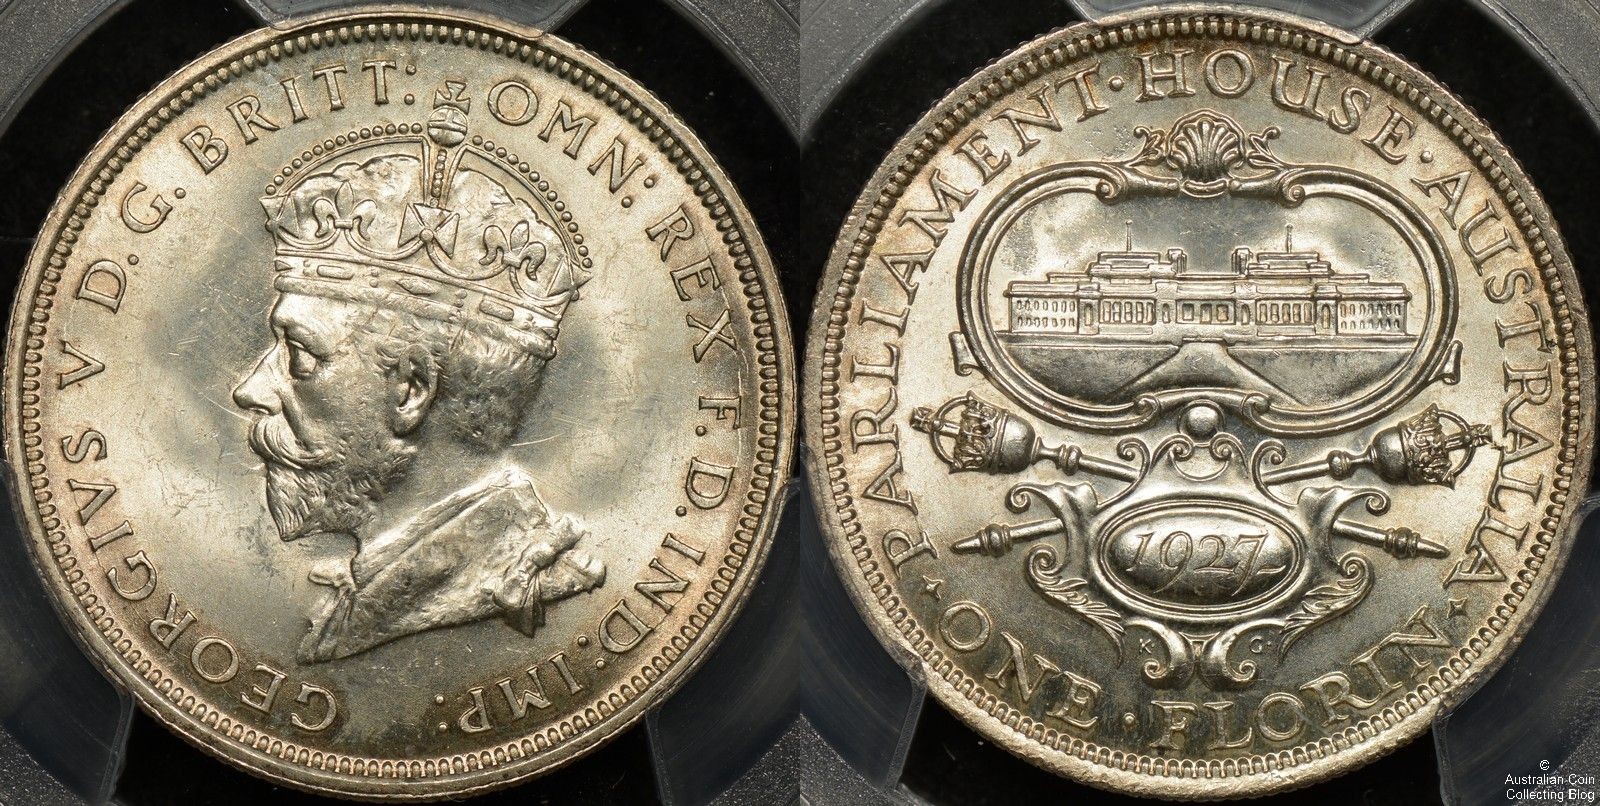 1927 Parliament Florin with portrait of King George V